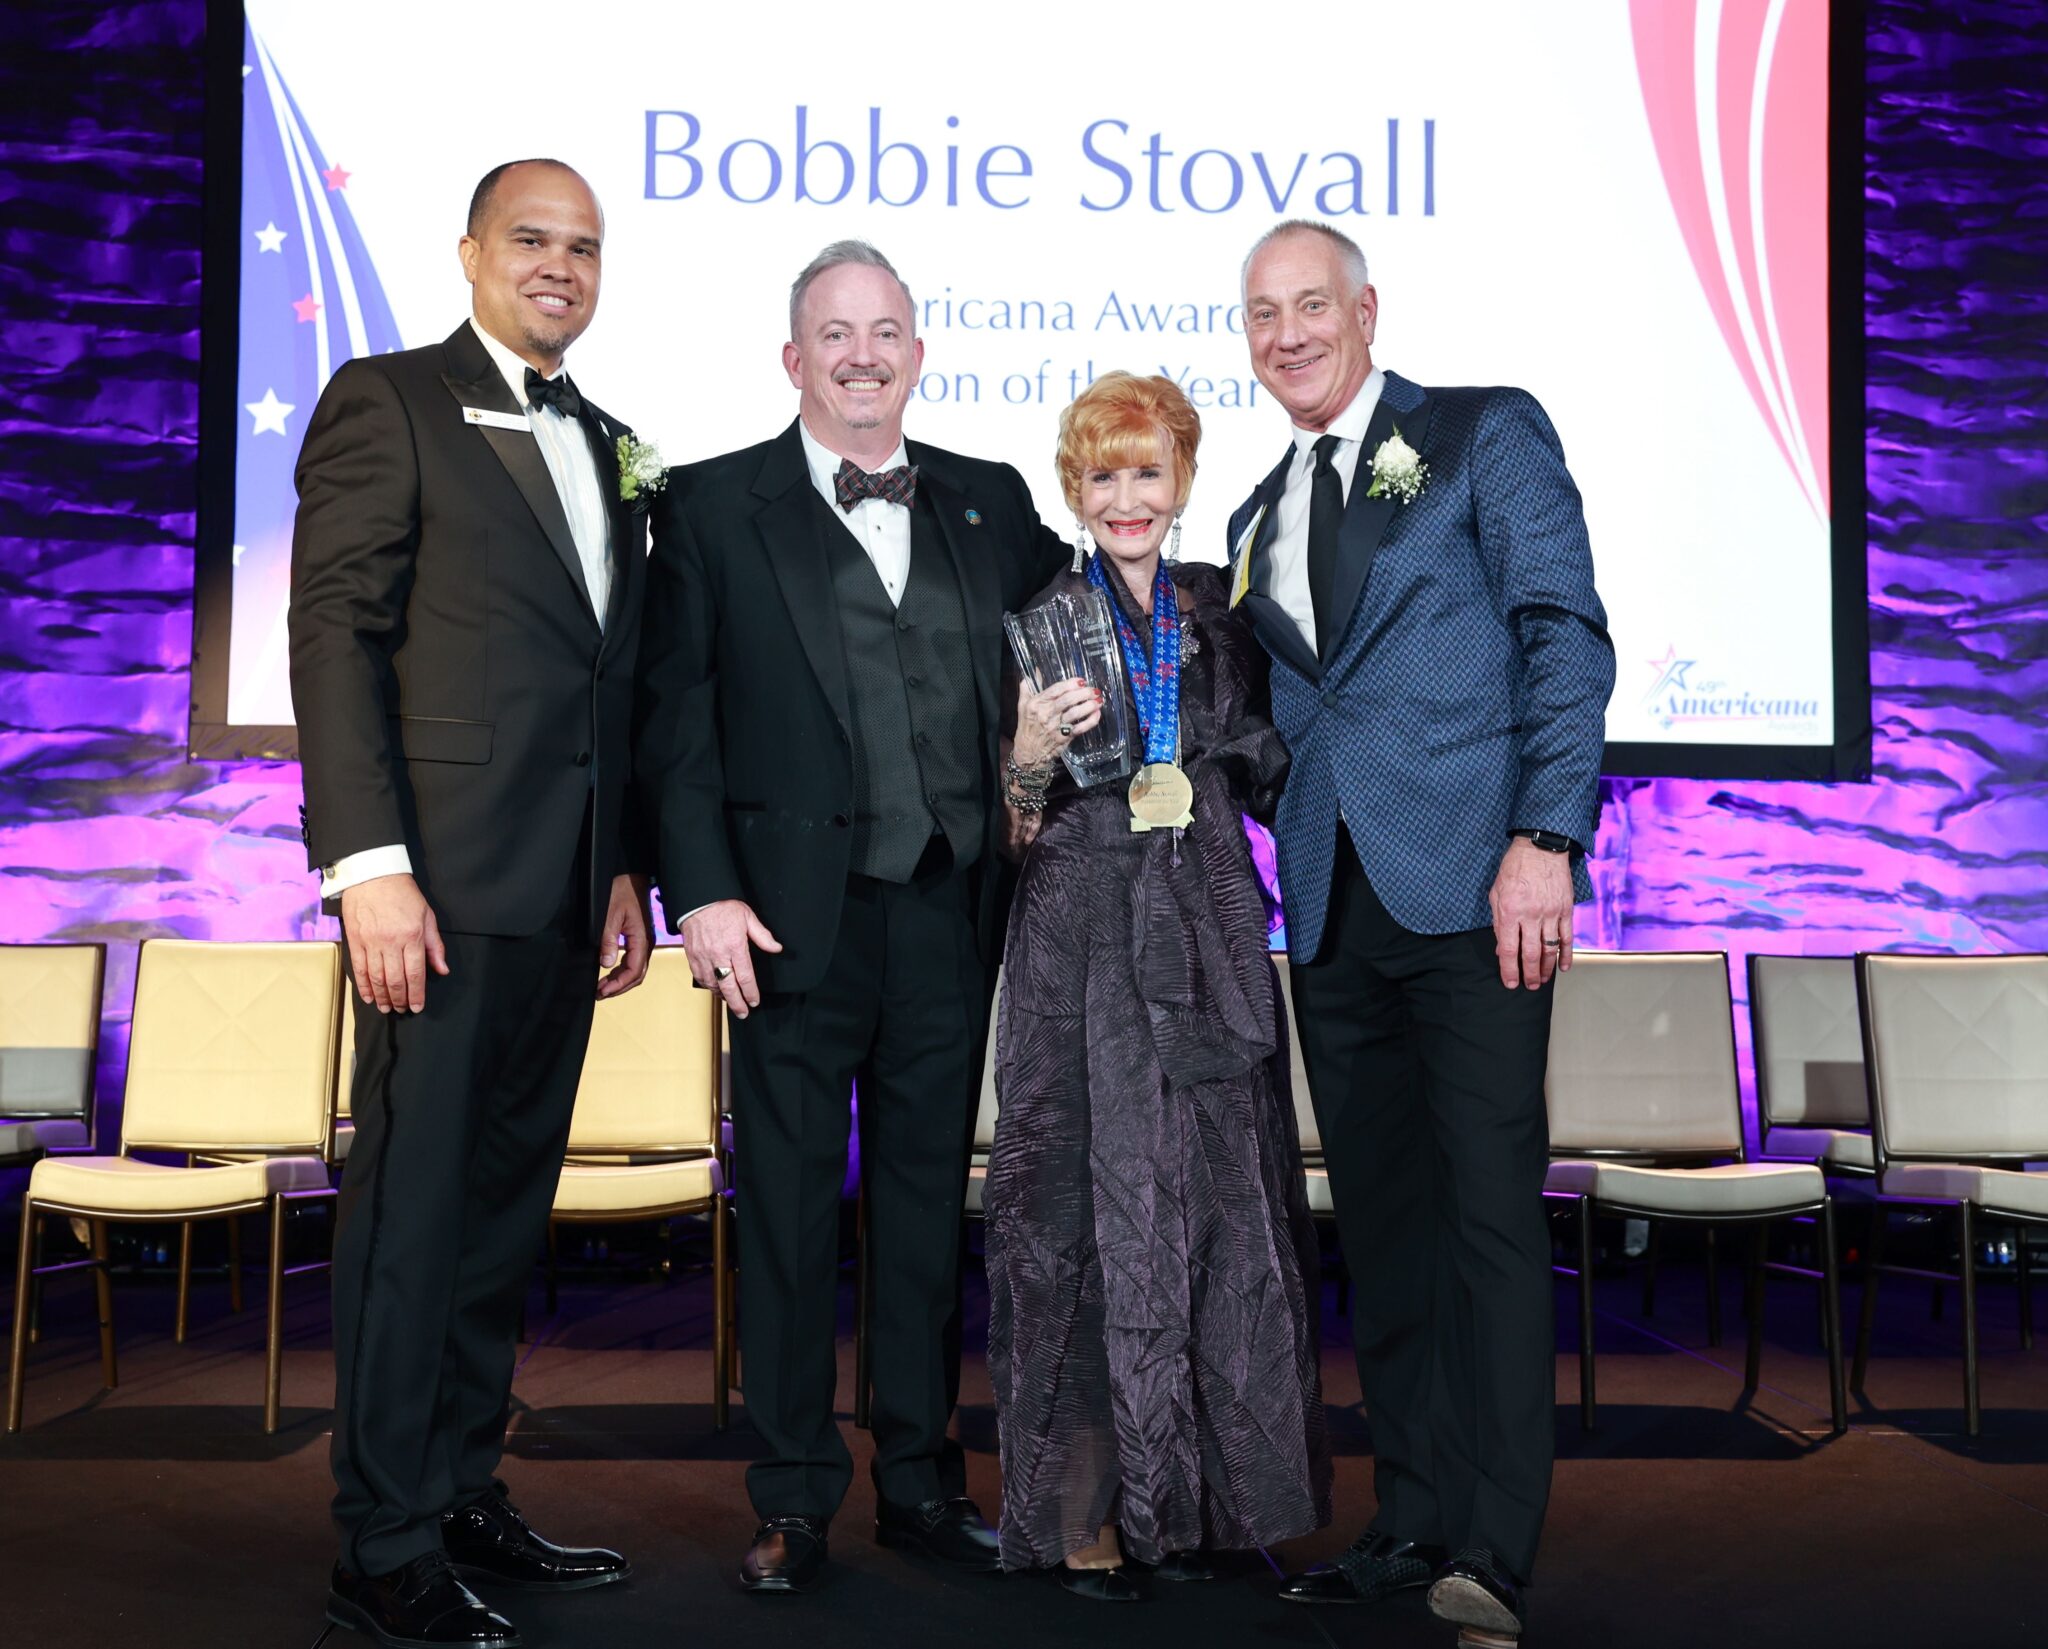 Person of the Year, Bobbie Stovall, posing on stage with her award alongside Dr. Scott Thayer, Jim Vanderpool, and Curtis Scheetz.